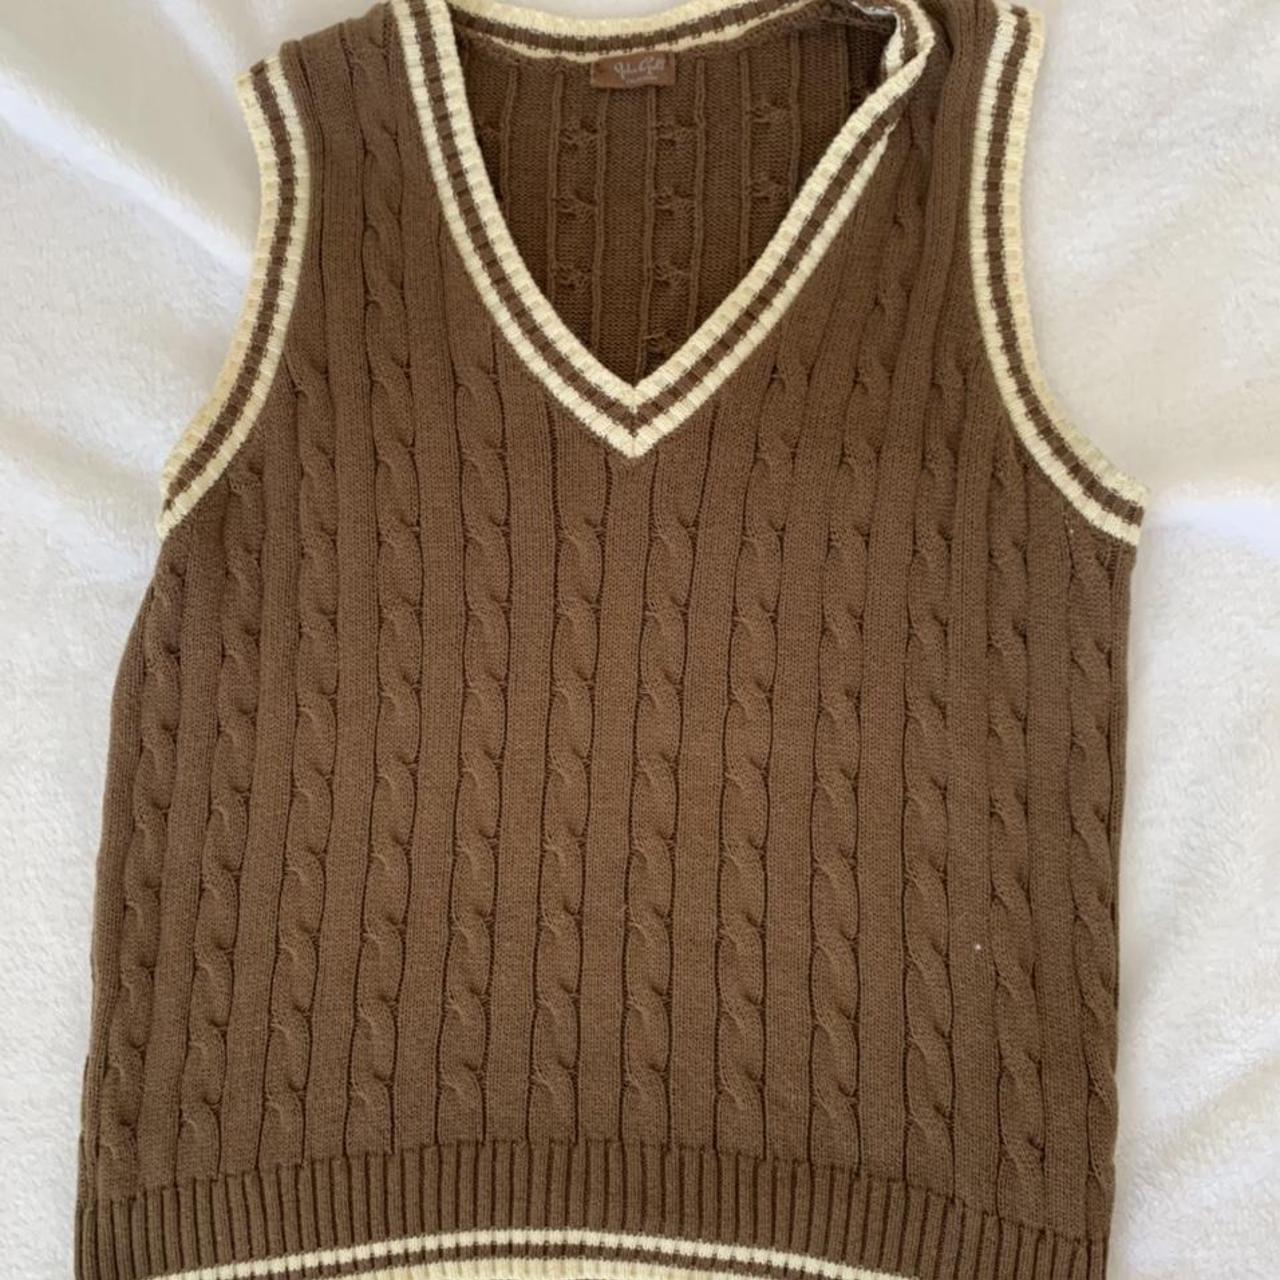 PacSun Women's Brown and White Gilet